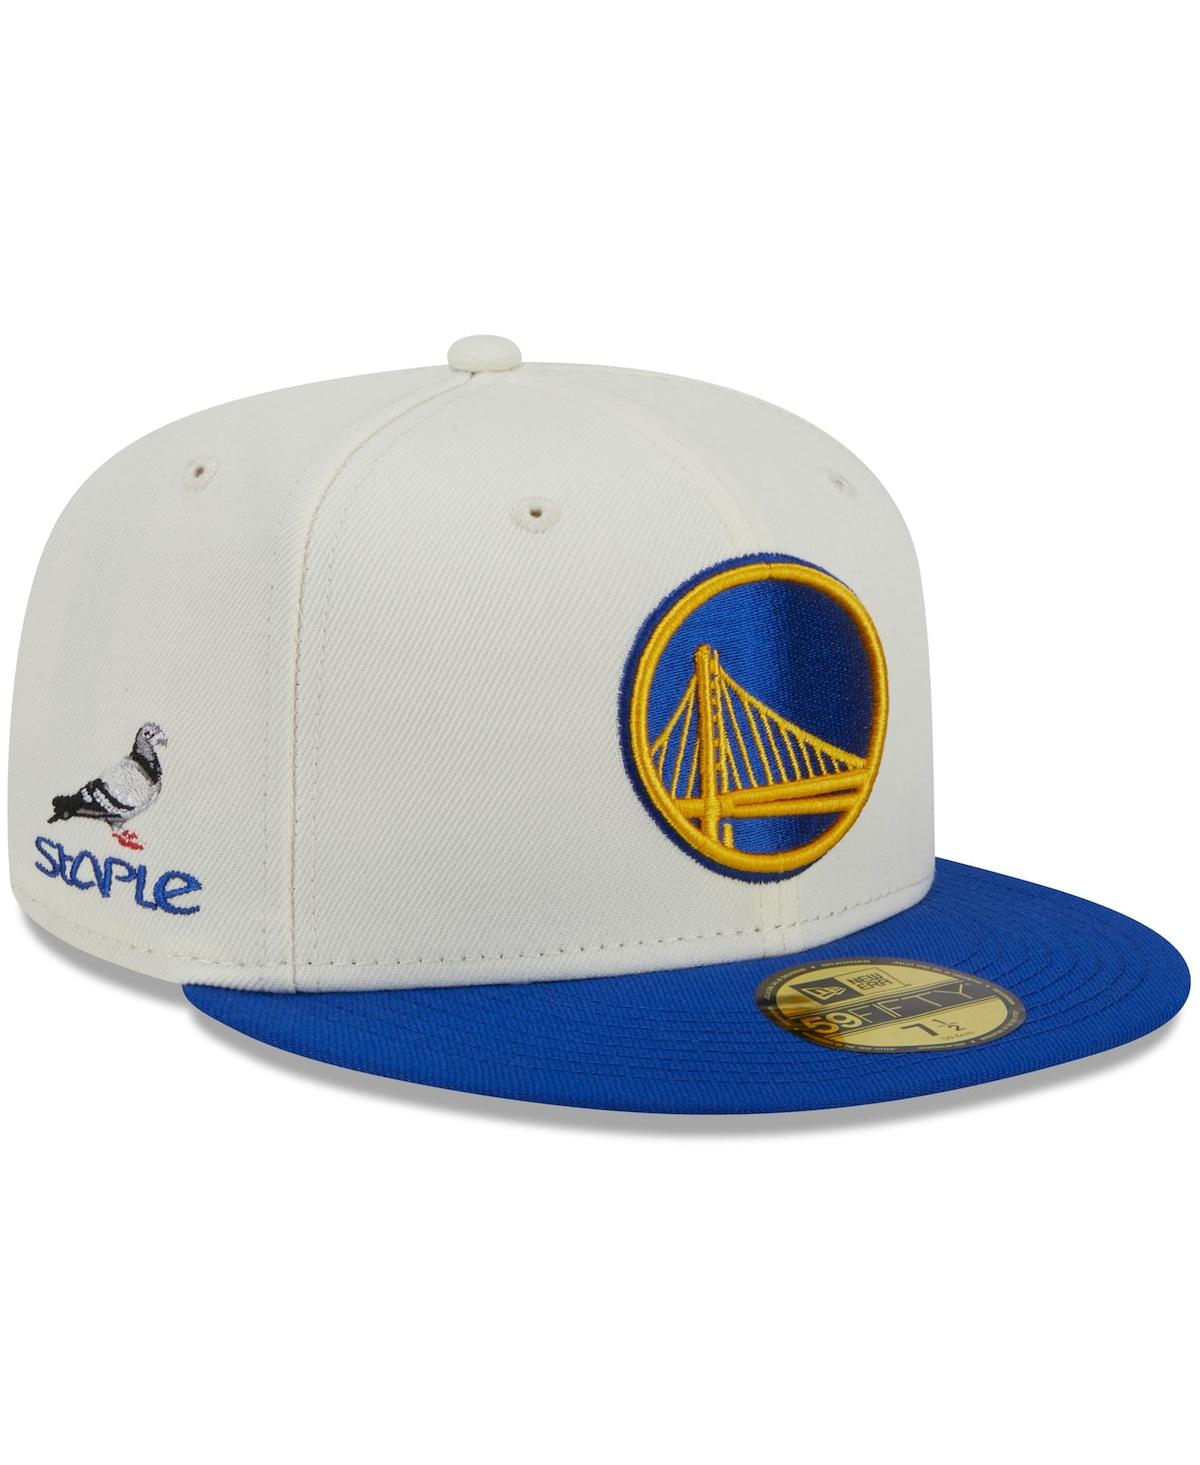 Men's New Era x Staple Cream, Royal Golden State Warriors Nba x Staple Two-Tone 59FIFTY Fitted Hat - Cream, Royal